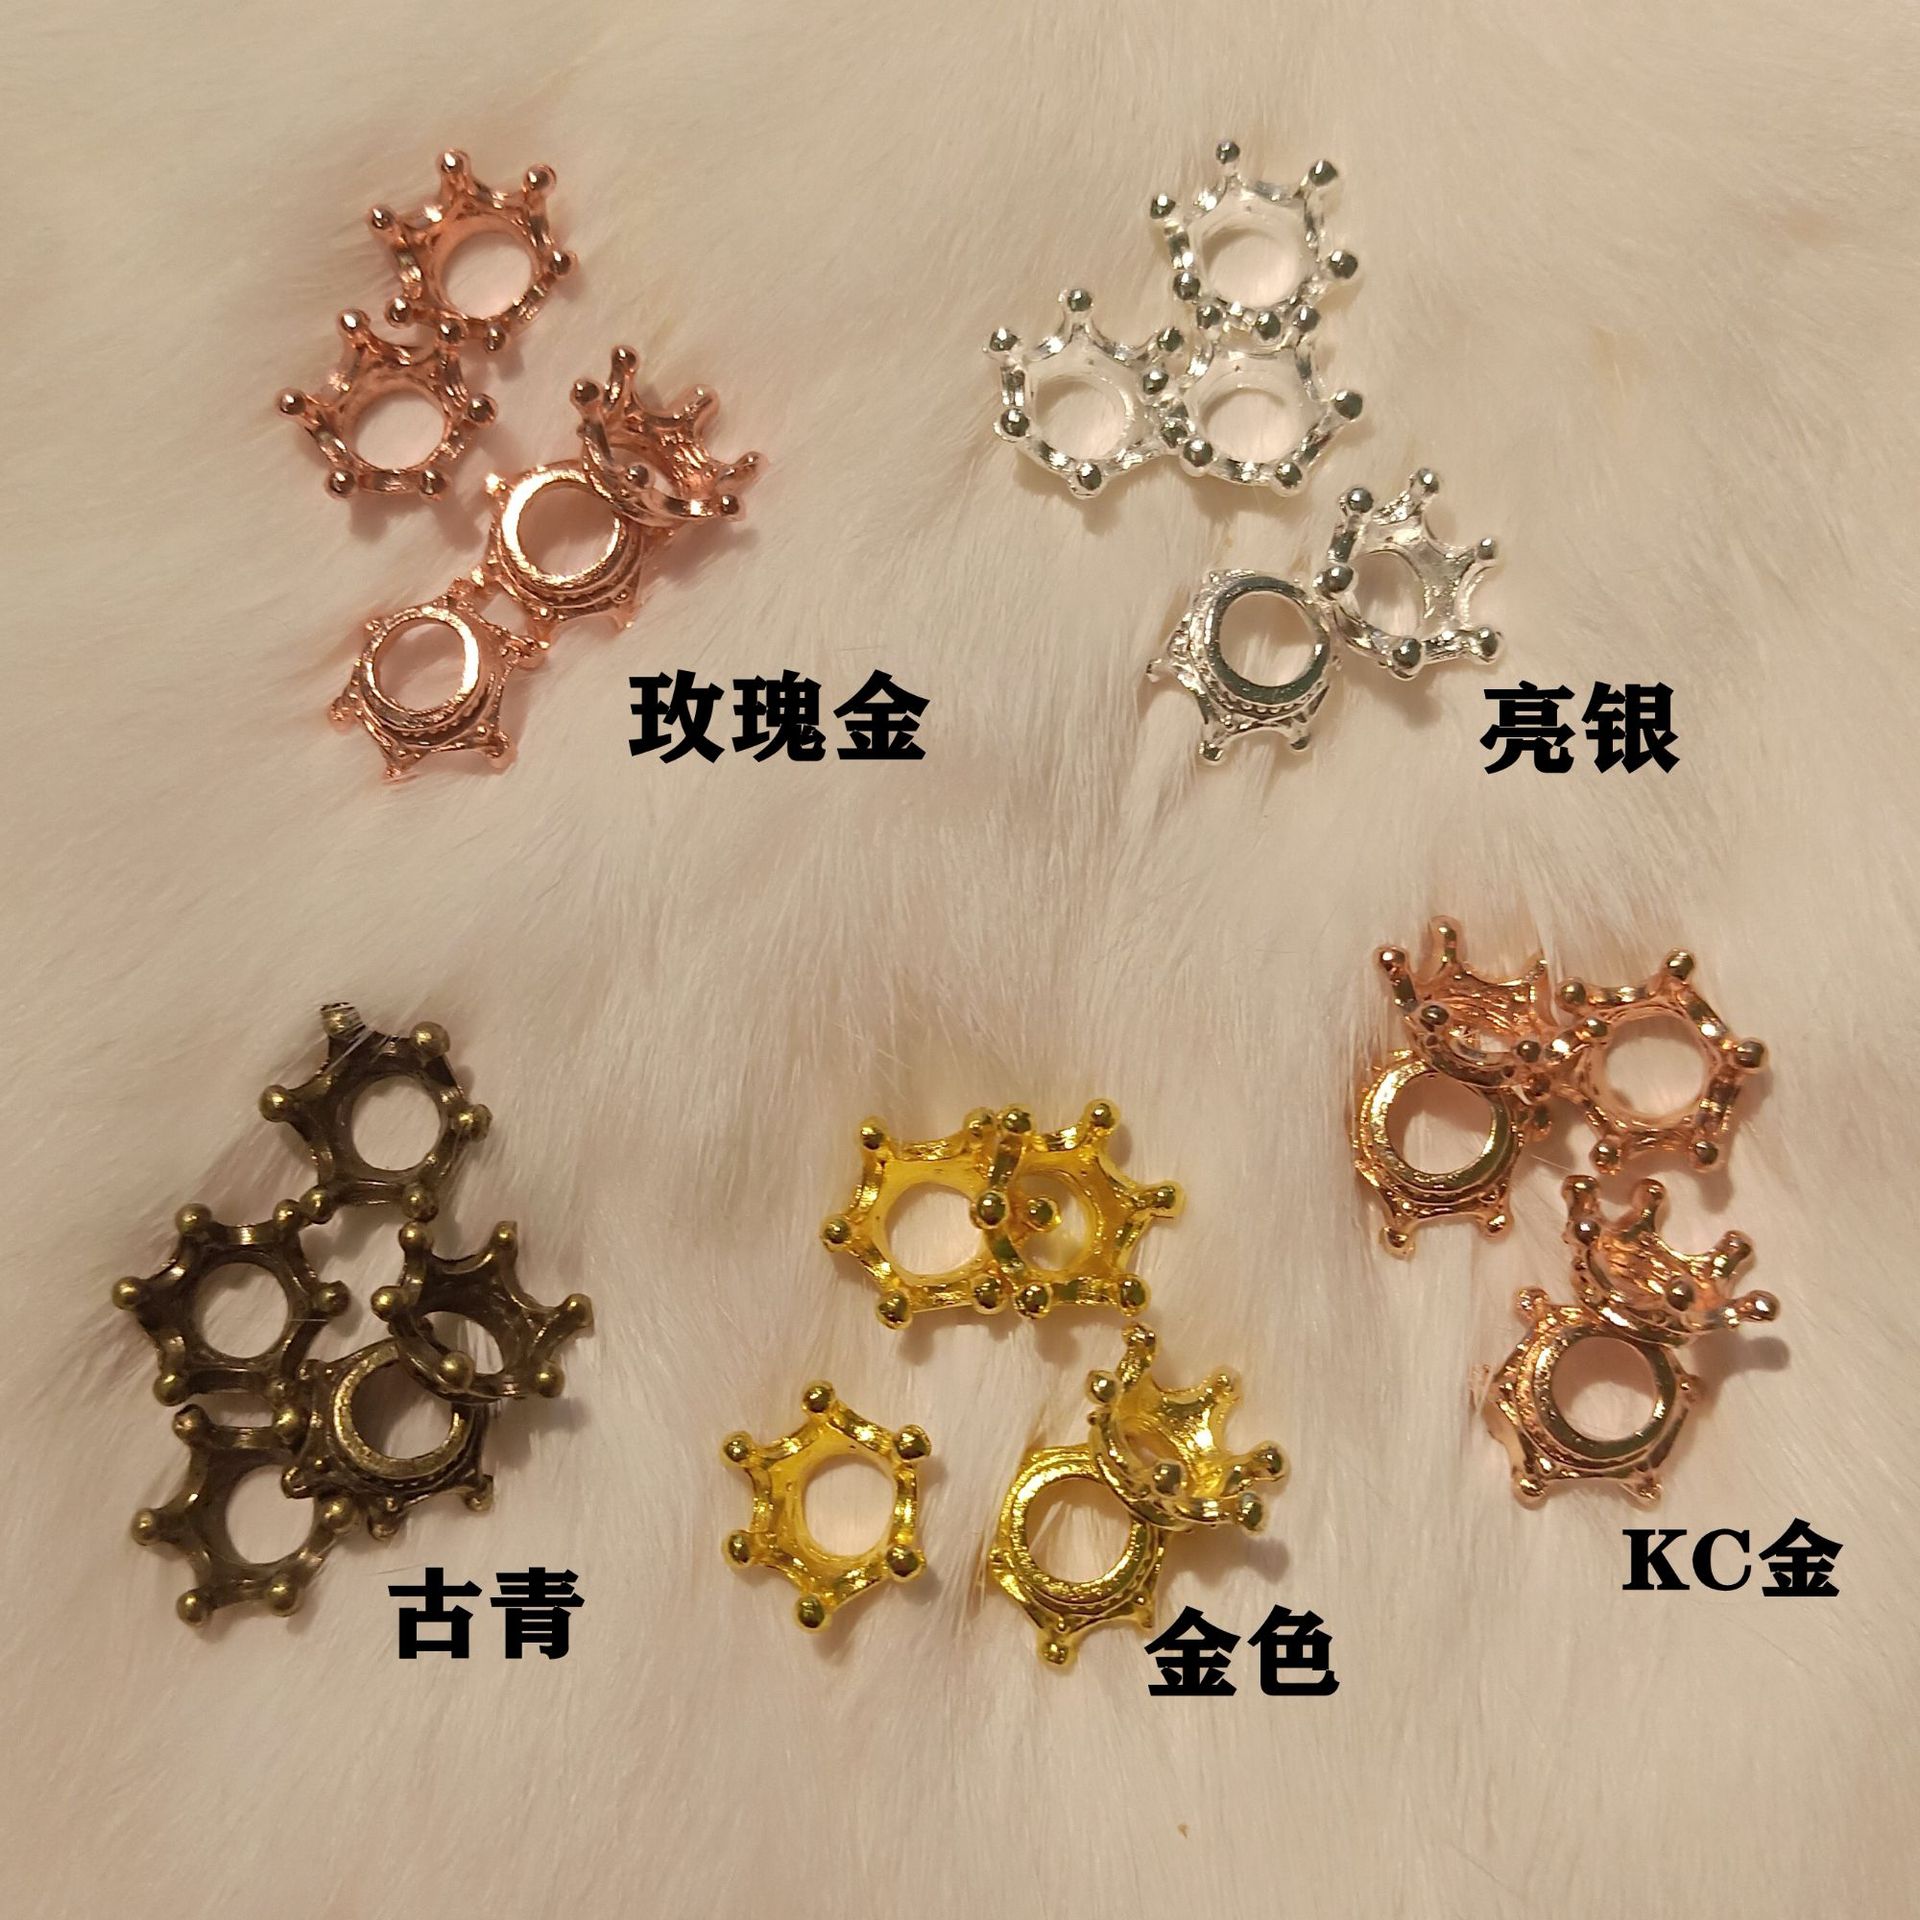 Stereoscopic Crown retro alloy UV accessories clothing DIY accessories manufacturers